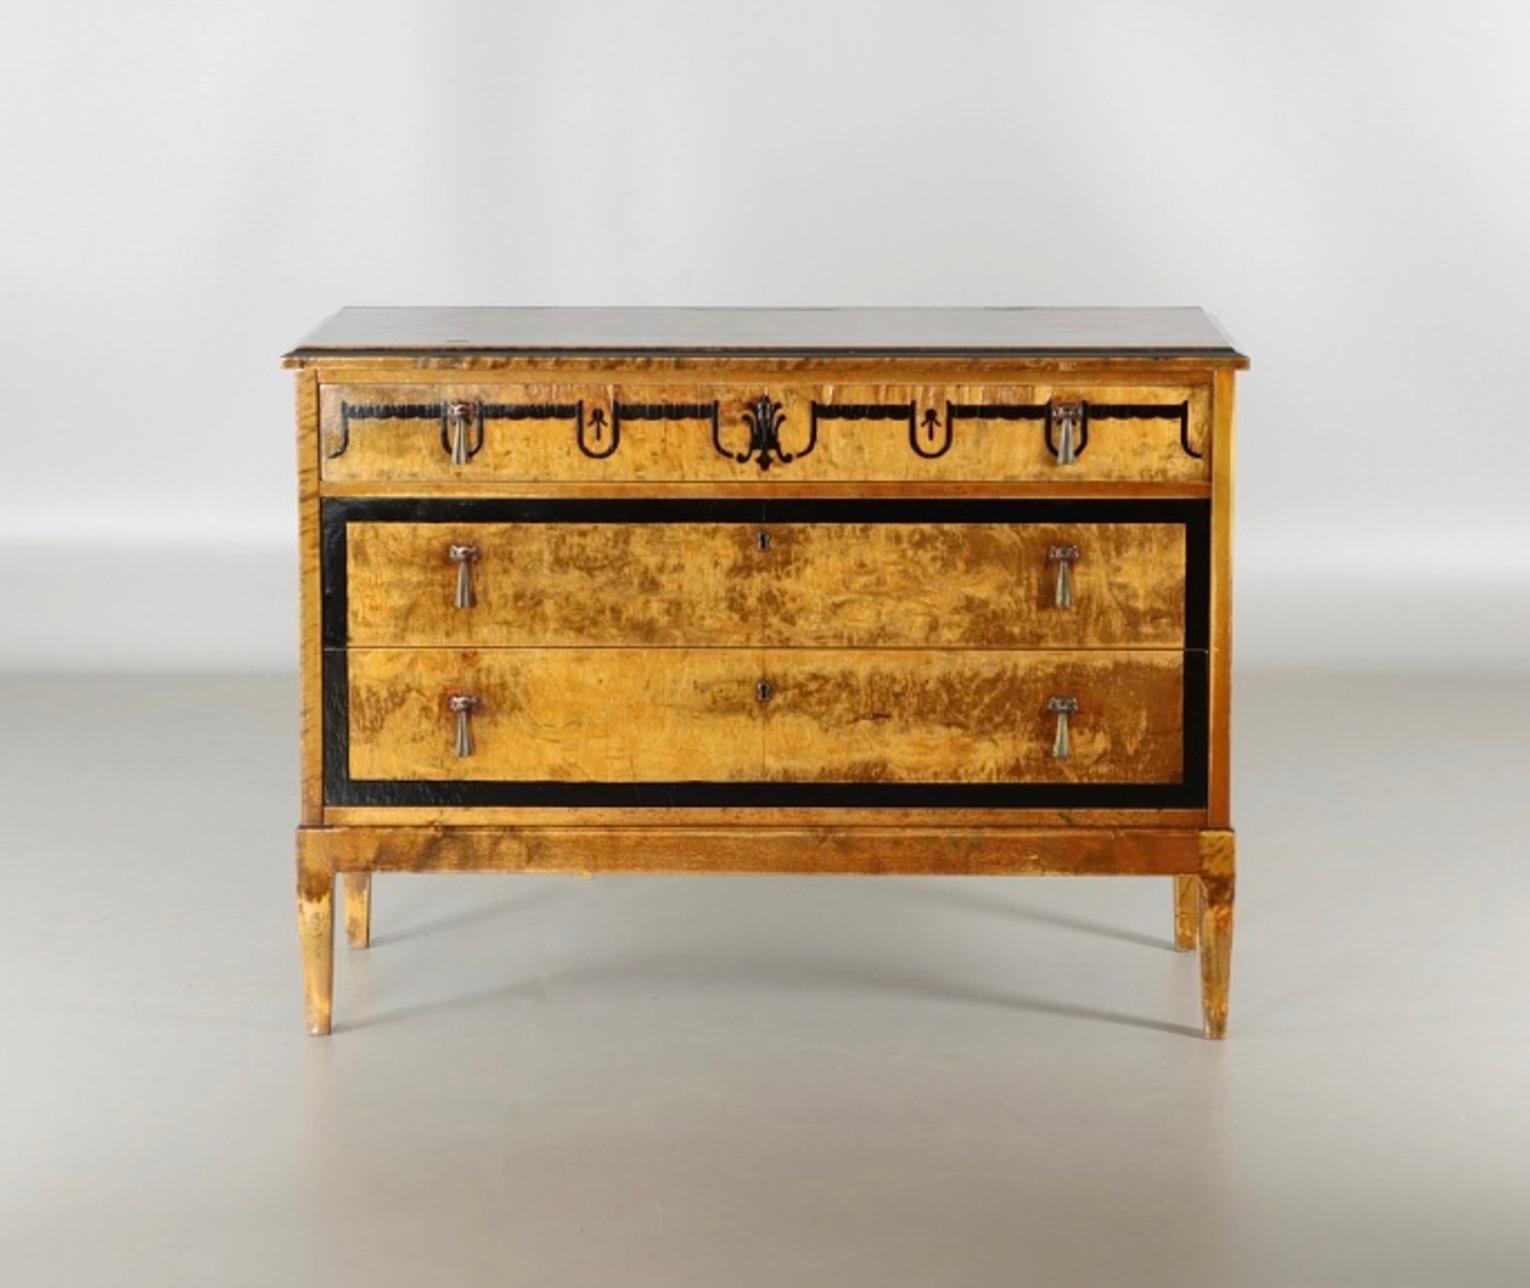 An Art Deco chest of drawers in birch wood, marquetry, with three drawers and handles in copper and brass, the birch wood has been painted with floral motifs and lacquered, the key is not available.,